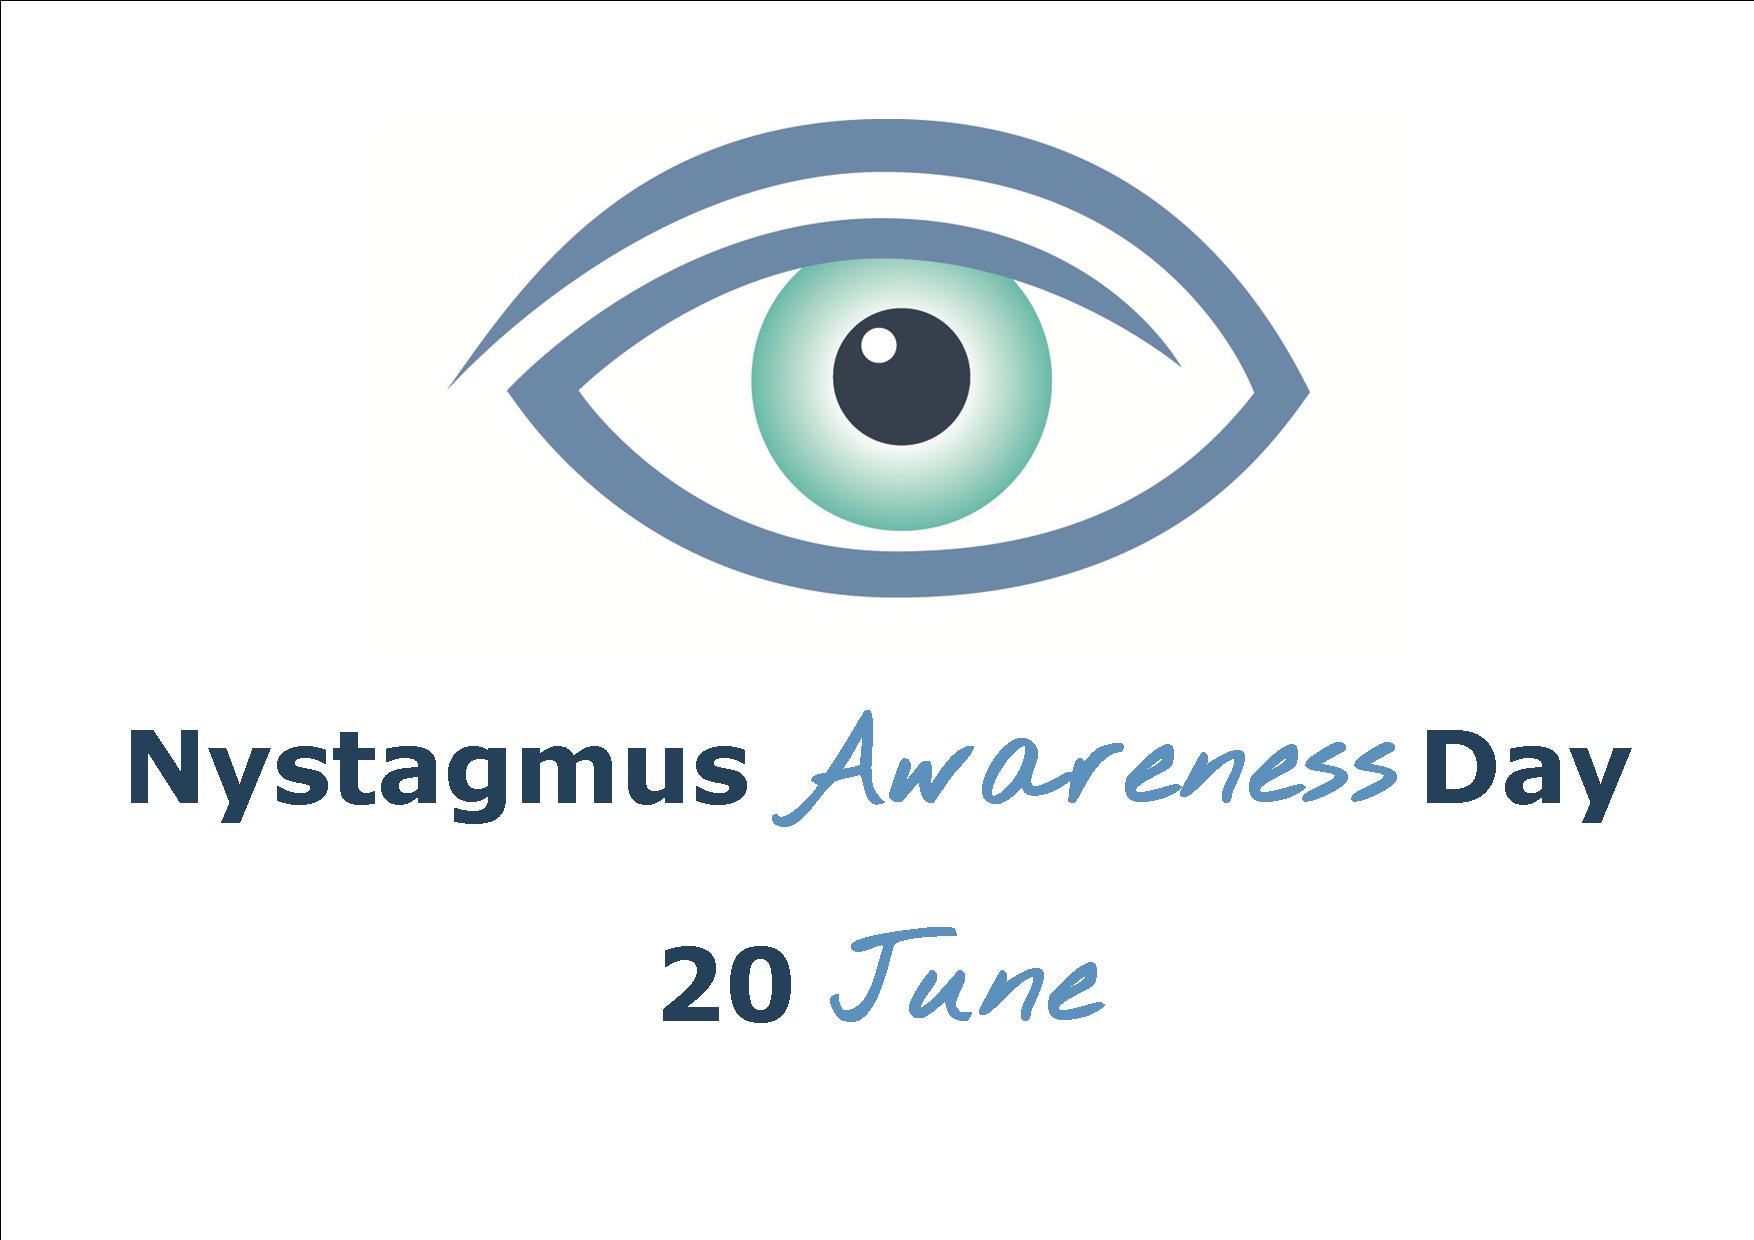 The eye logo of the Nystagmus Network and the words Nystagmus Awareness Day 20 June